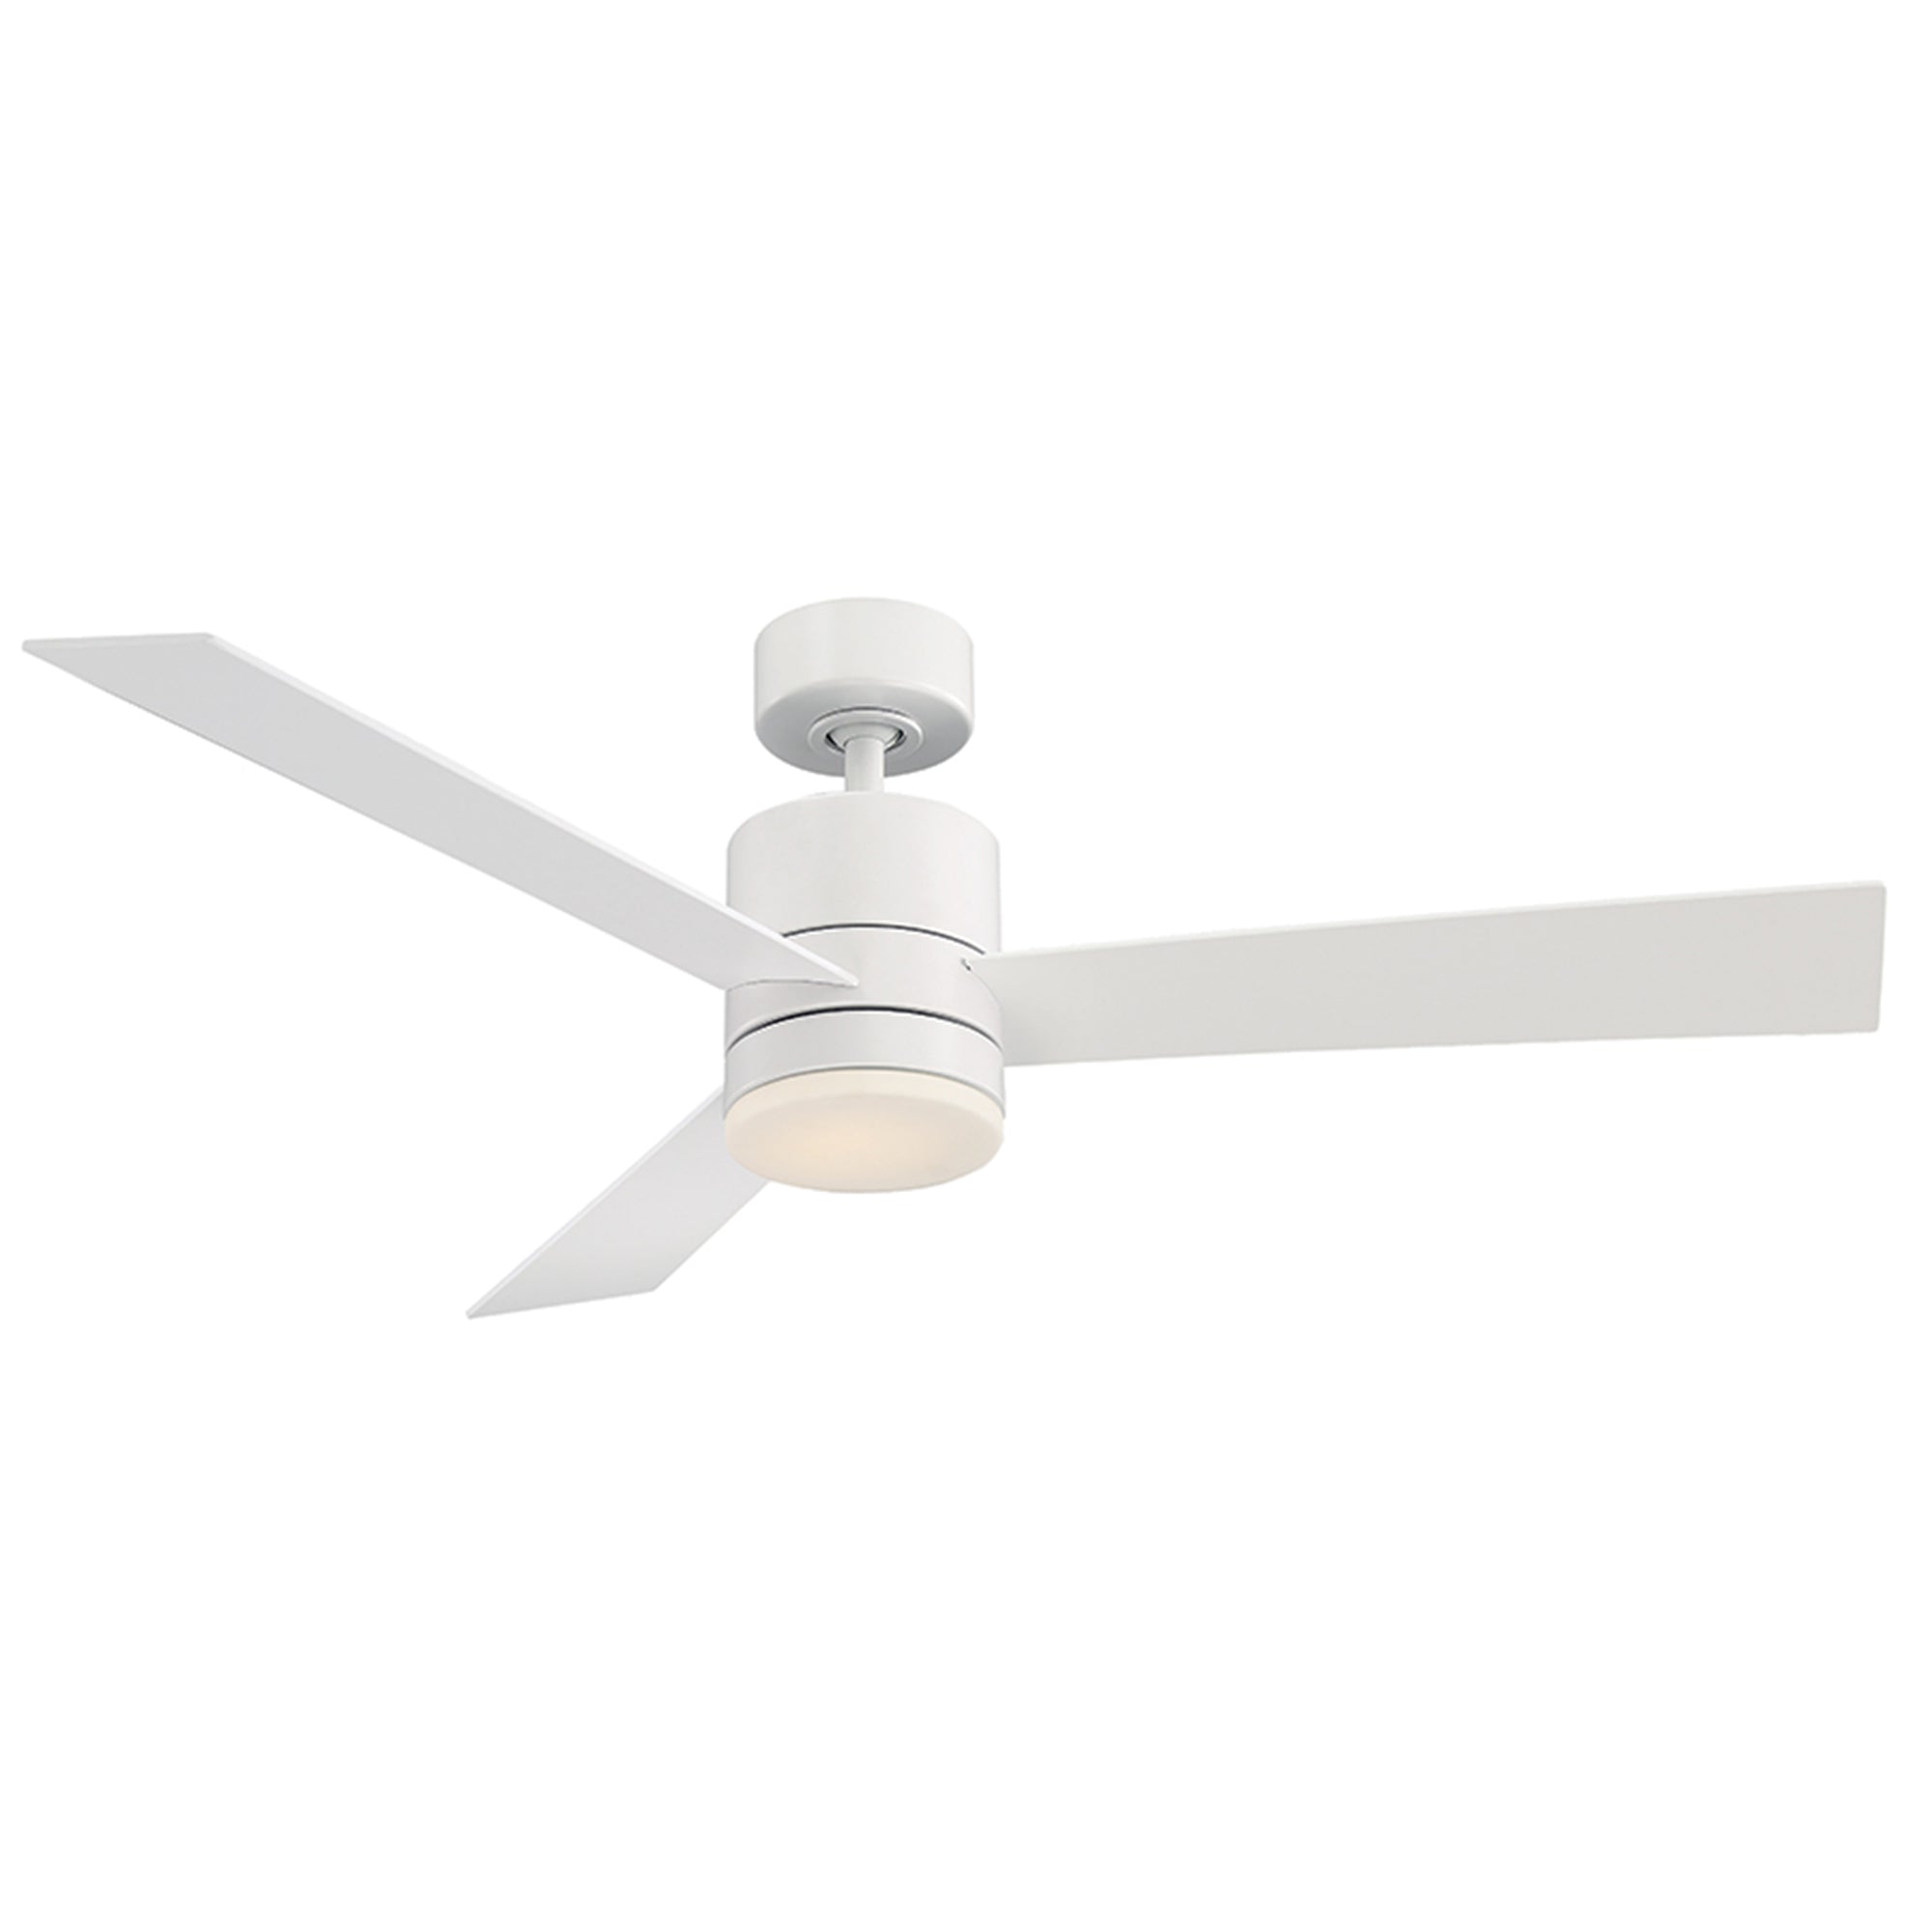 Axis Indoor/Outdoor 3-Blade 52" Smart Ceiling Fan with LED Light Kit and Remote Control